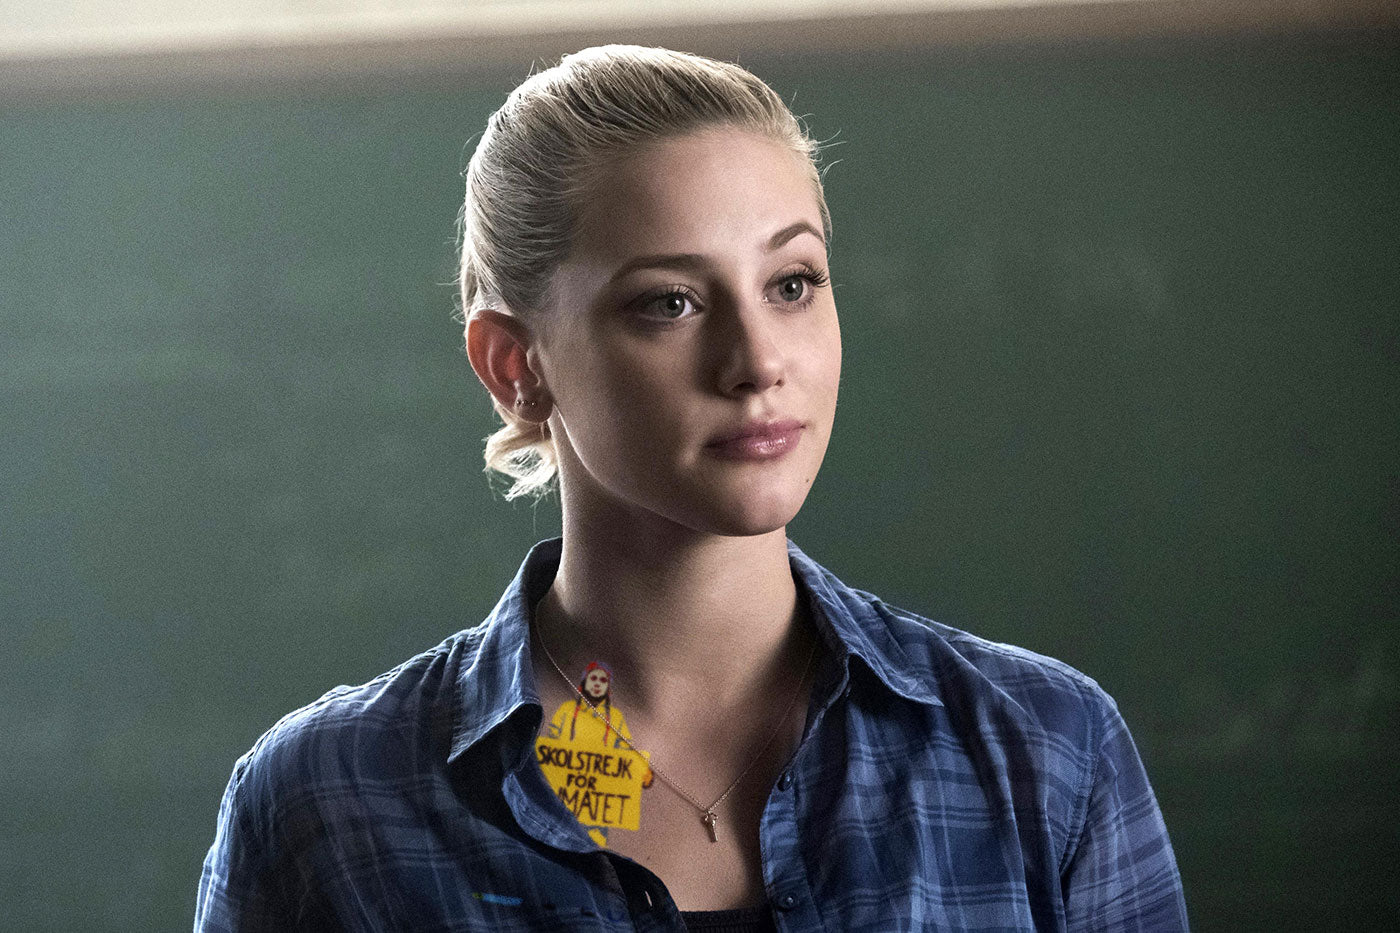 Lili-Reinhart war for climate lets strike now and show support for Greta 